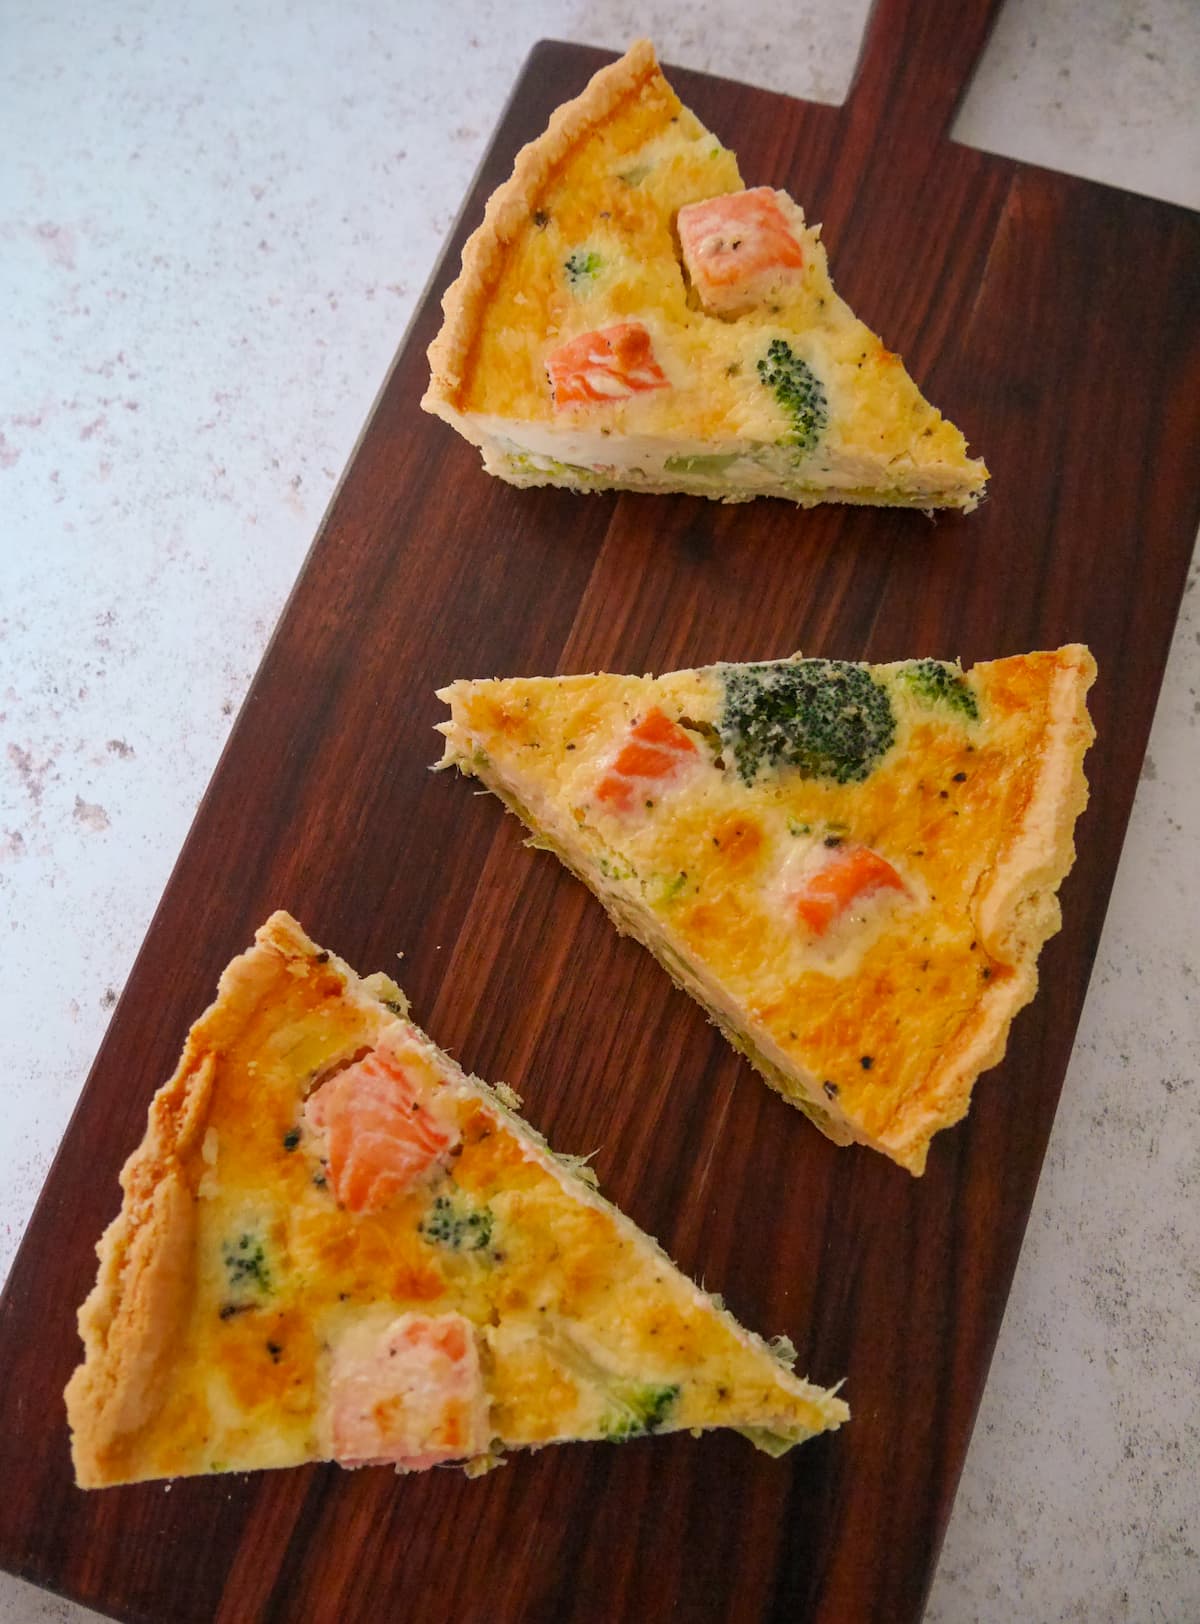 Three wedges of salmon and broccoli tart set on a wooden platter.